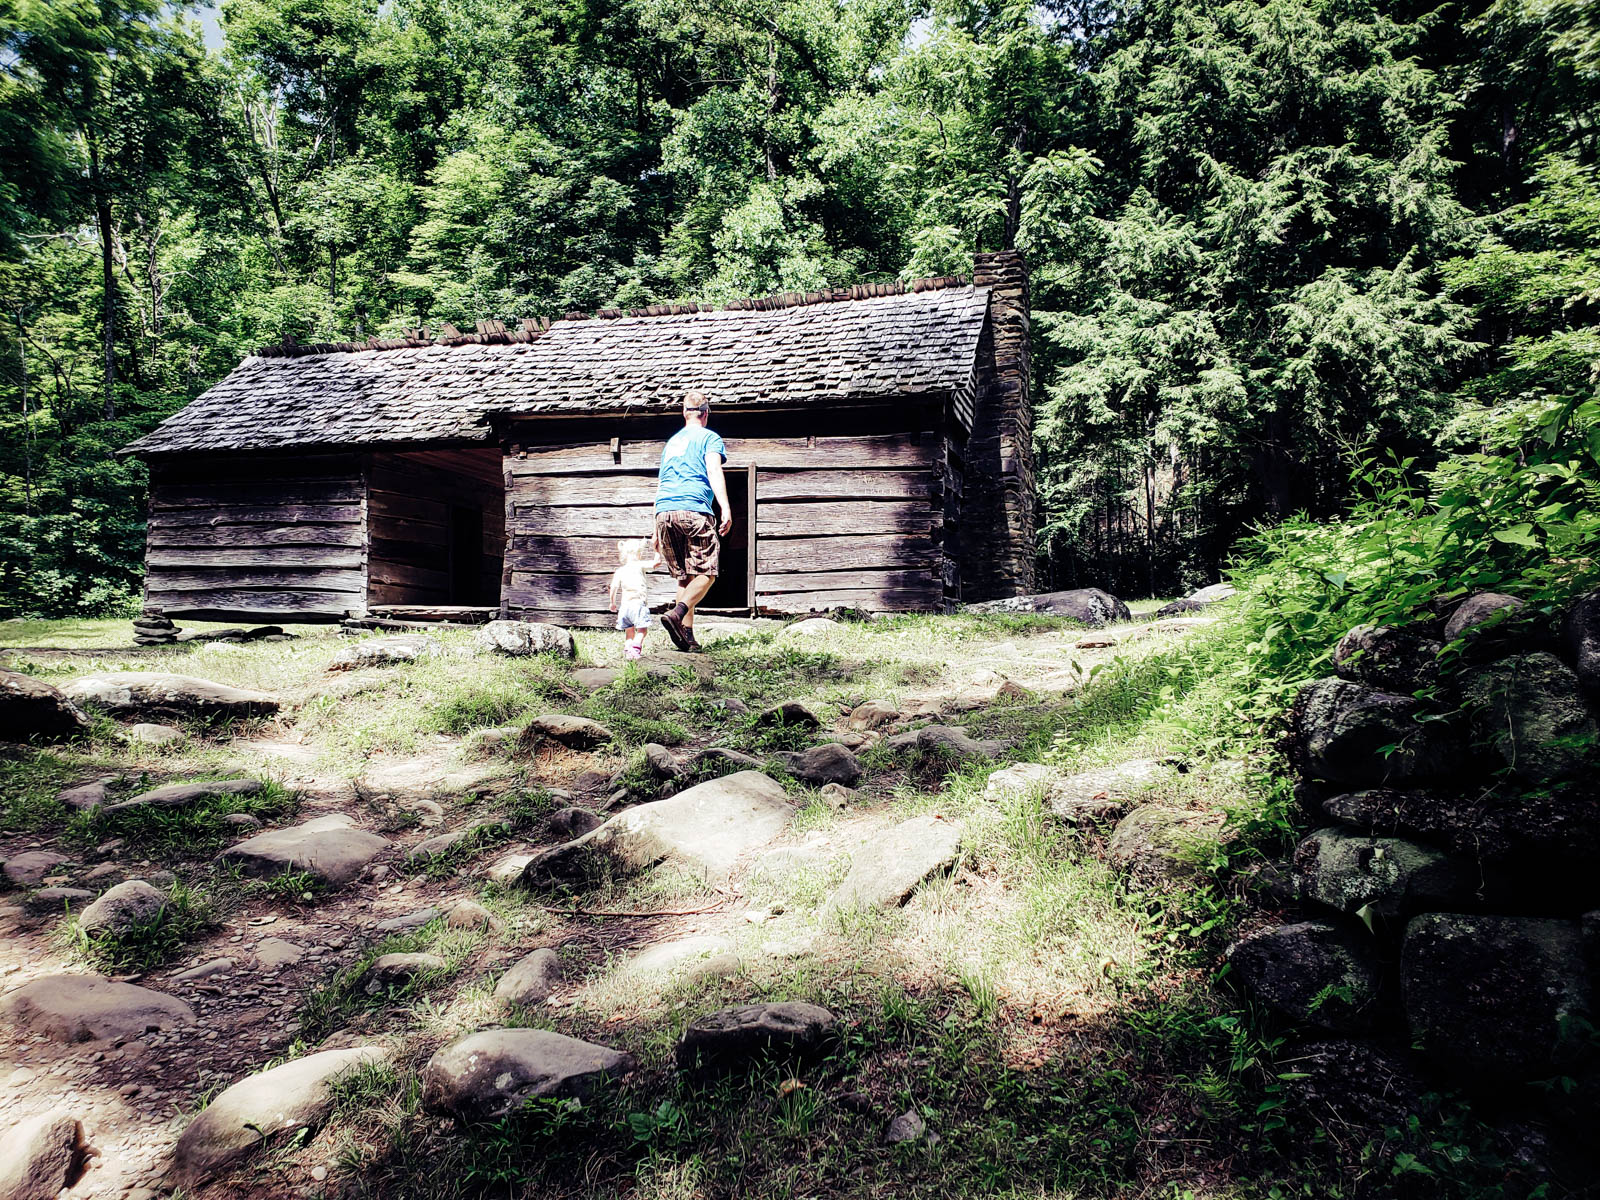 Visiting historical sites in Great Smoky Mountain National Park